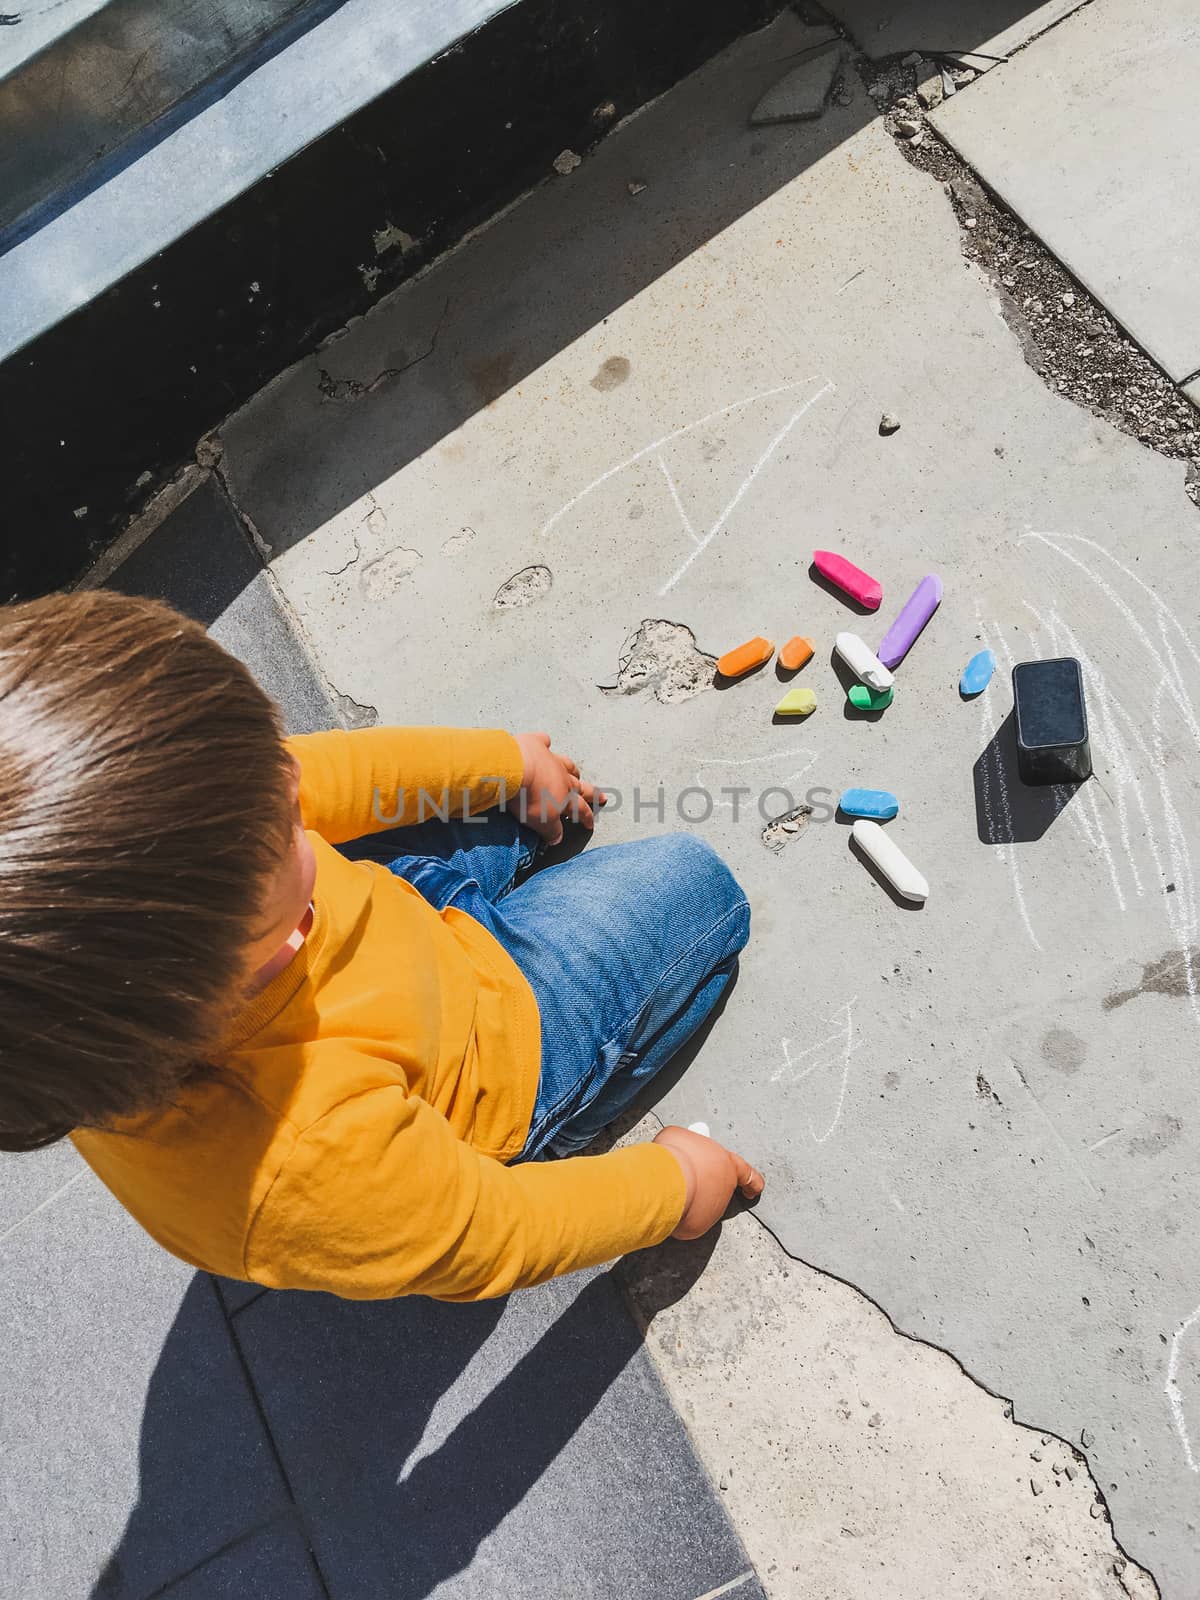 Toddler in jeans draws with crayons on the asphalt in sunny day. Child is holding colored crayons. Kid's hands and clothes are covered with colorful stains. Outdoor leisure activity.